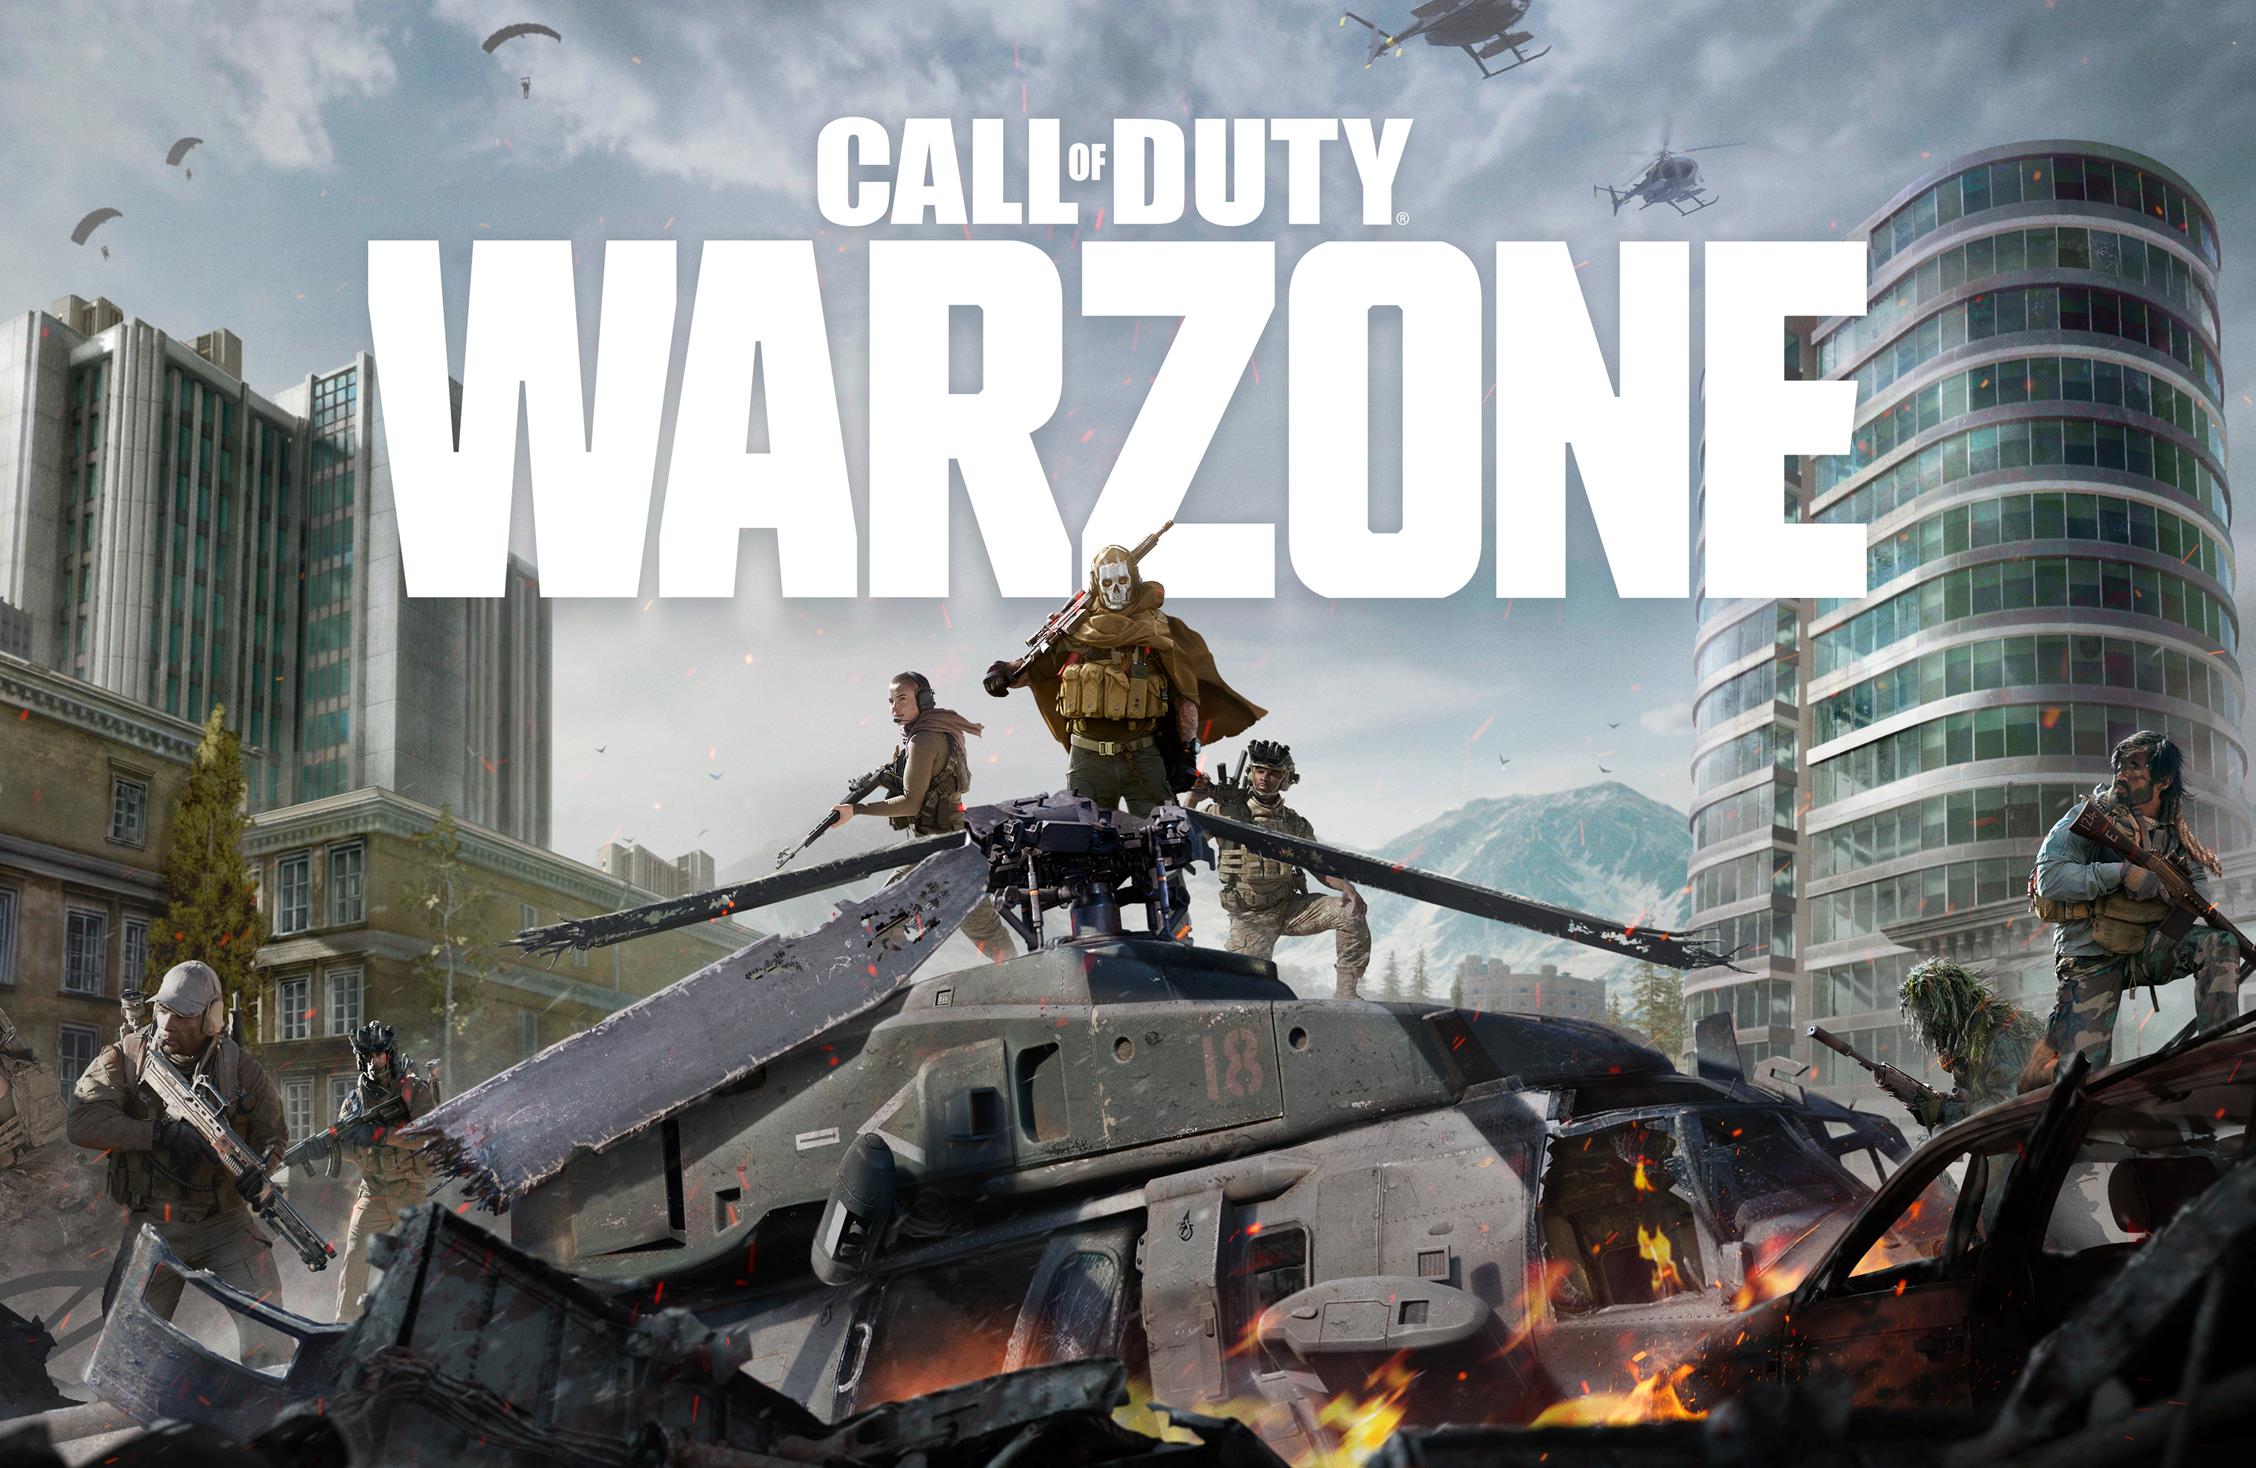 Image for More Call of Duty: Warzone content on the way as Activision boosts development investment